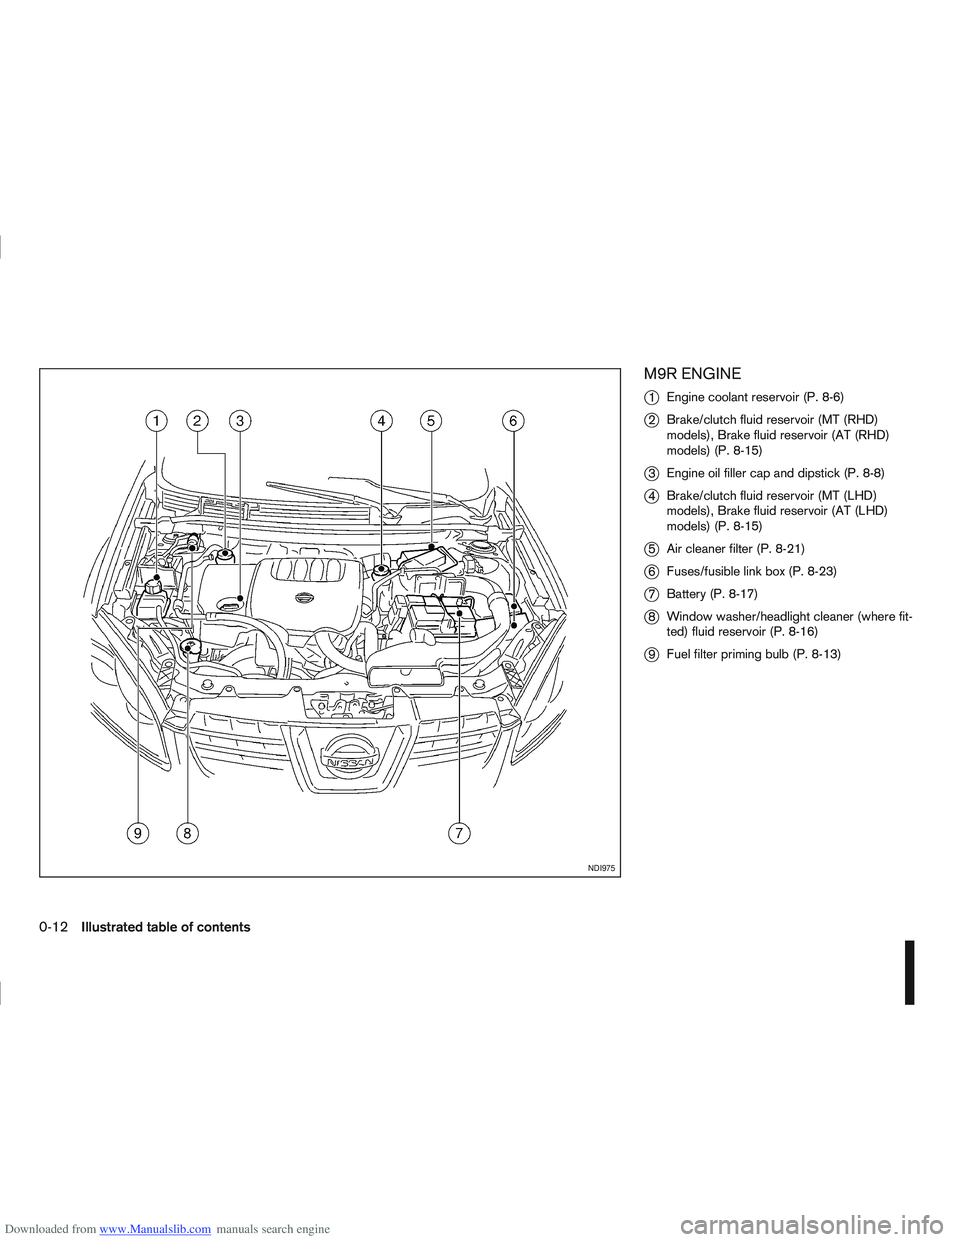 NISSAN QASHQAI 2009  Owners Manual Downloaded from www.Manualslib.com manuals search engine M9R ENGINE
j
1Engine coolant reservoir (P. 8-6)
j2Brake/clutch fluid reservoir (MT (RHD)
models), Brake fluid reservoir (AT (RHD)
models) (P. 8